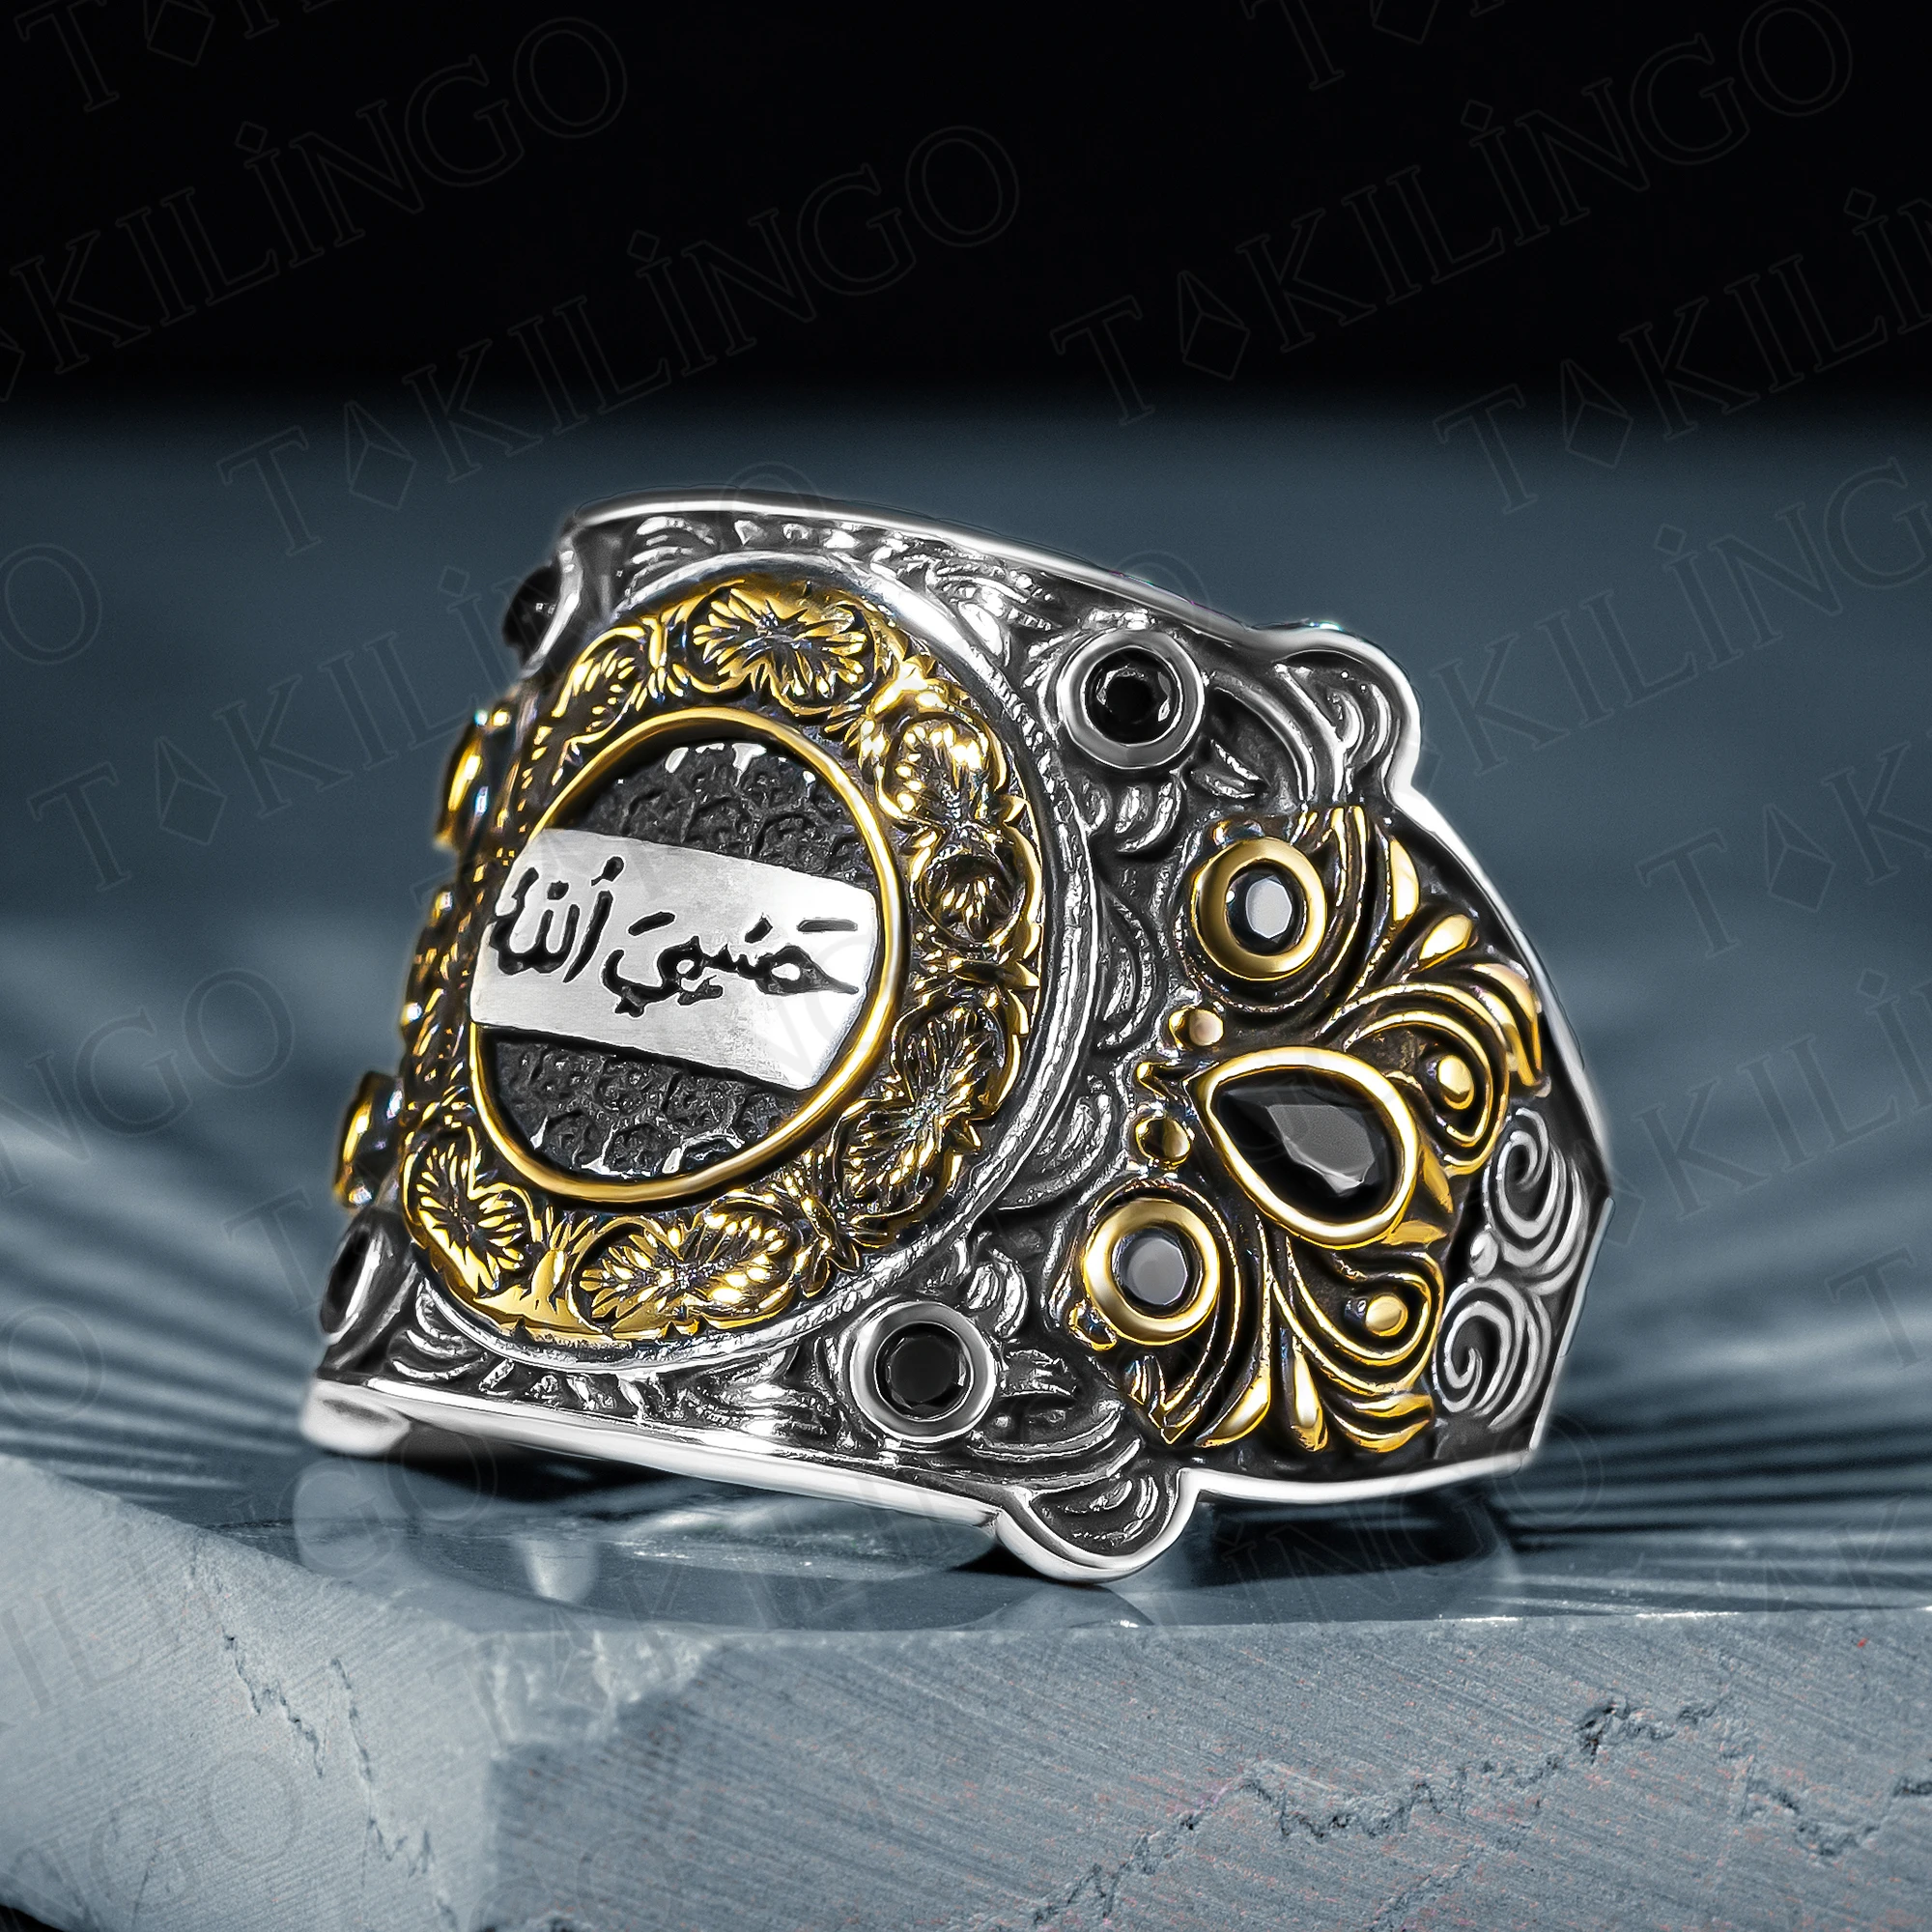 Persia | Seljuk ring; silver and gold set with a deep purple stone seal  bearing the name of Ali Ibin Yusuf | Seal on ri… | Ancient jewelry,  Jewelry, Vintage jewelry